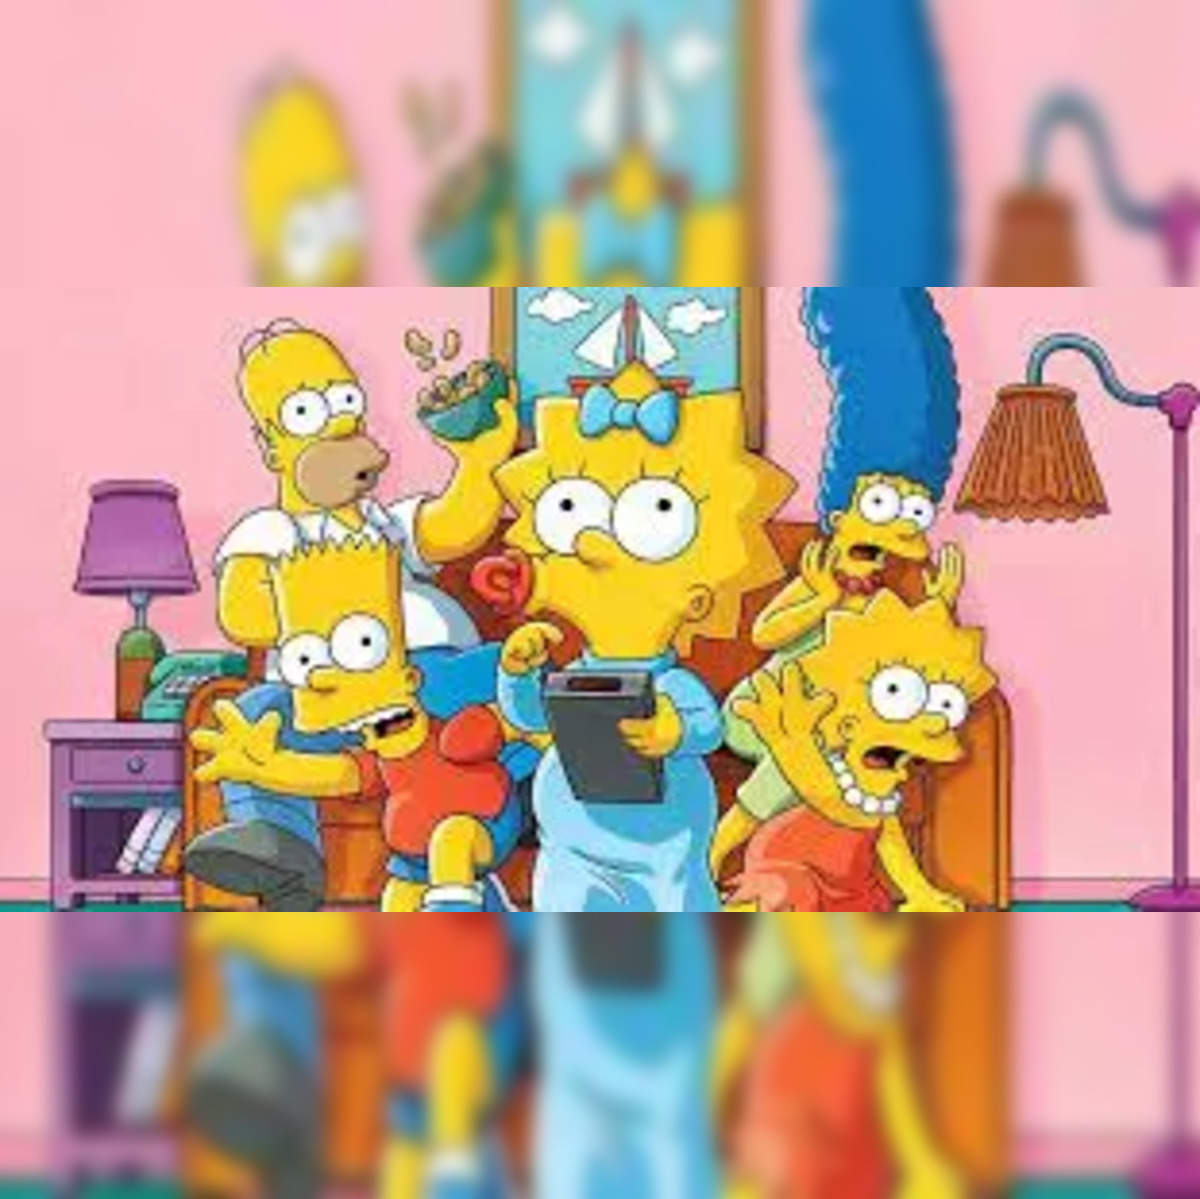 can we have a pool, dad? — All Bart and Milhouse have is each other.  They're